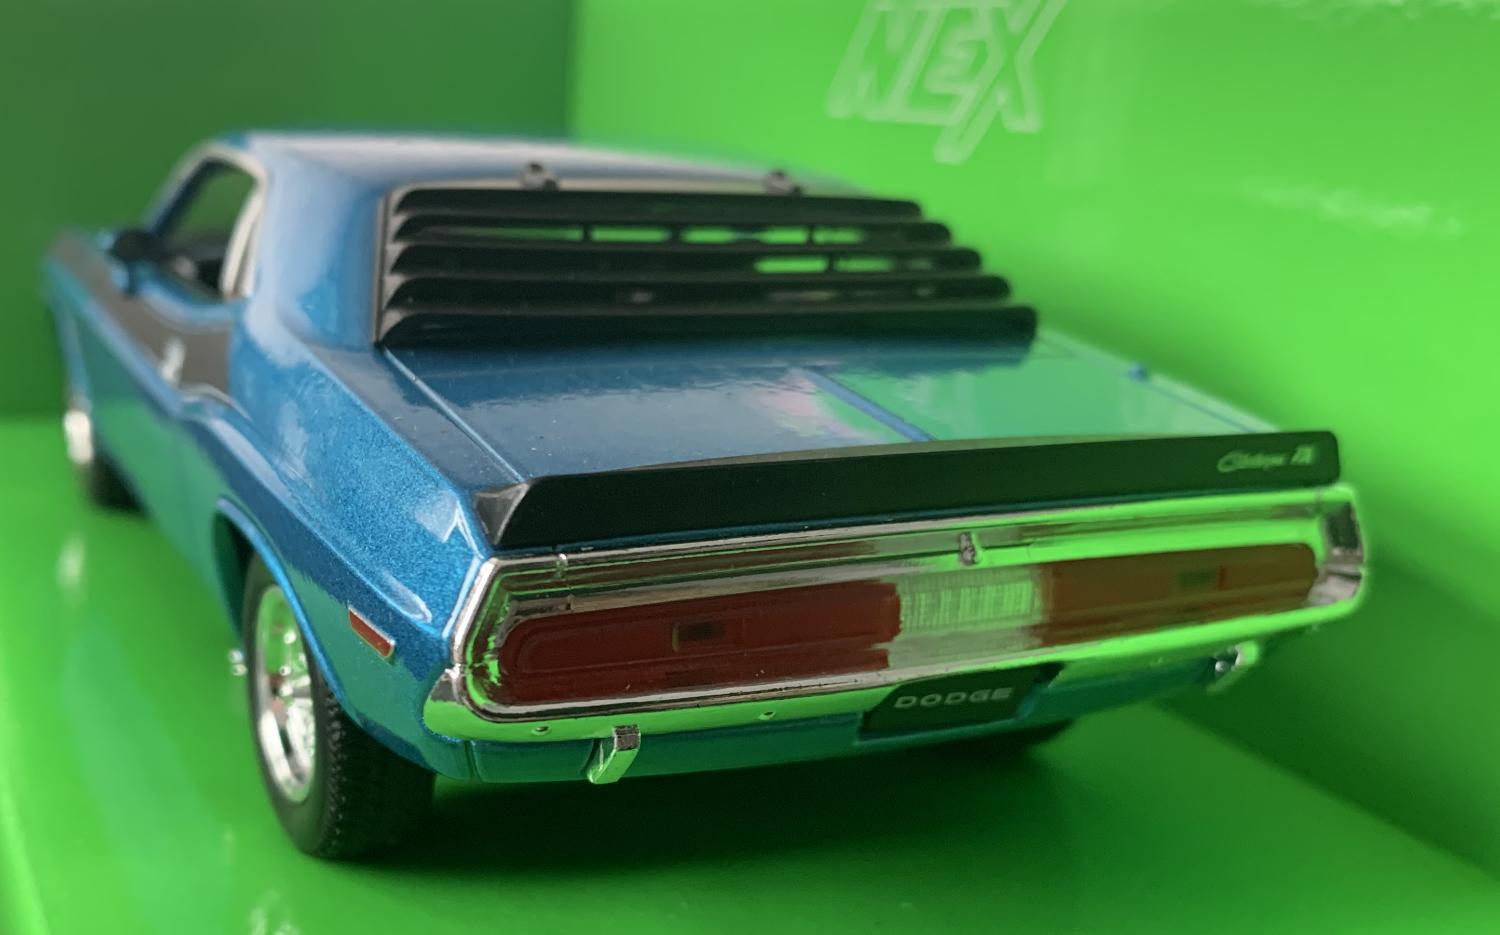 Dodge Challenger T/A 1970 in metallic blue 1:24 scale model from Welly